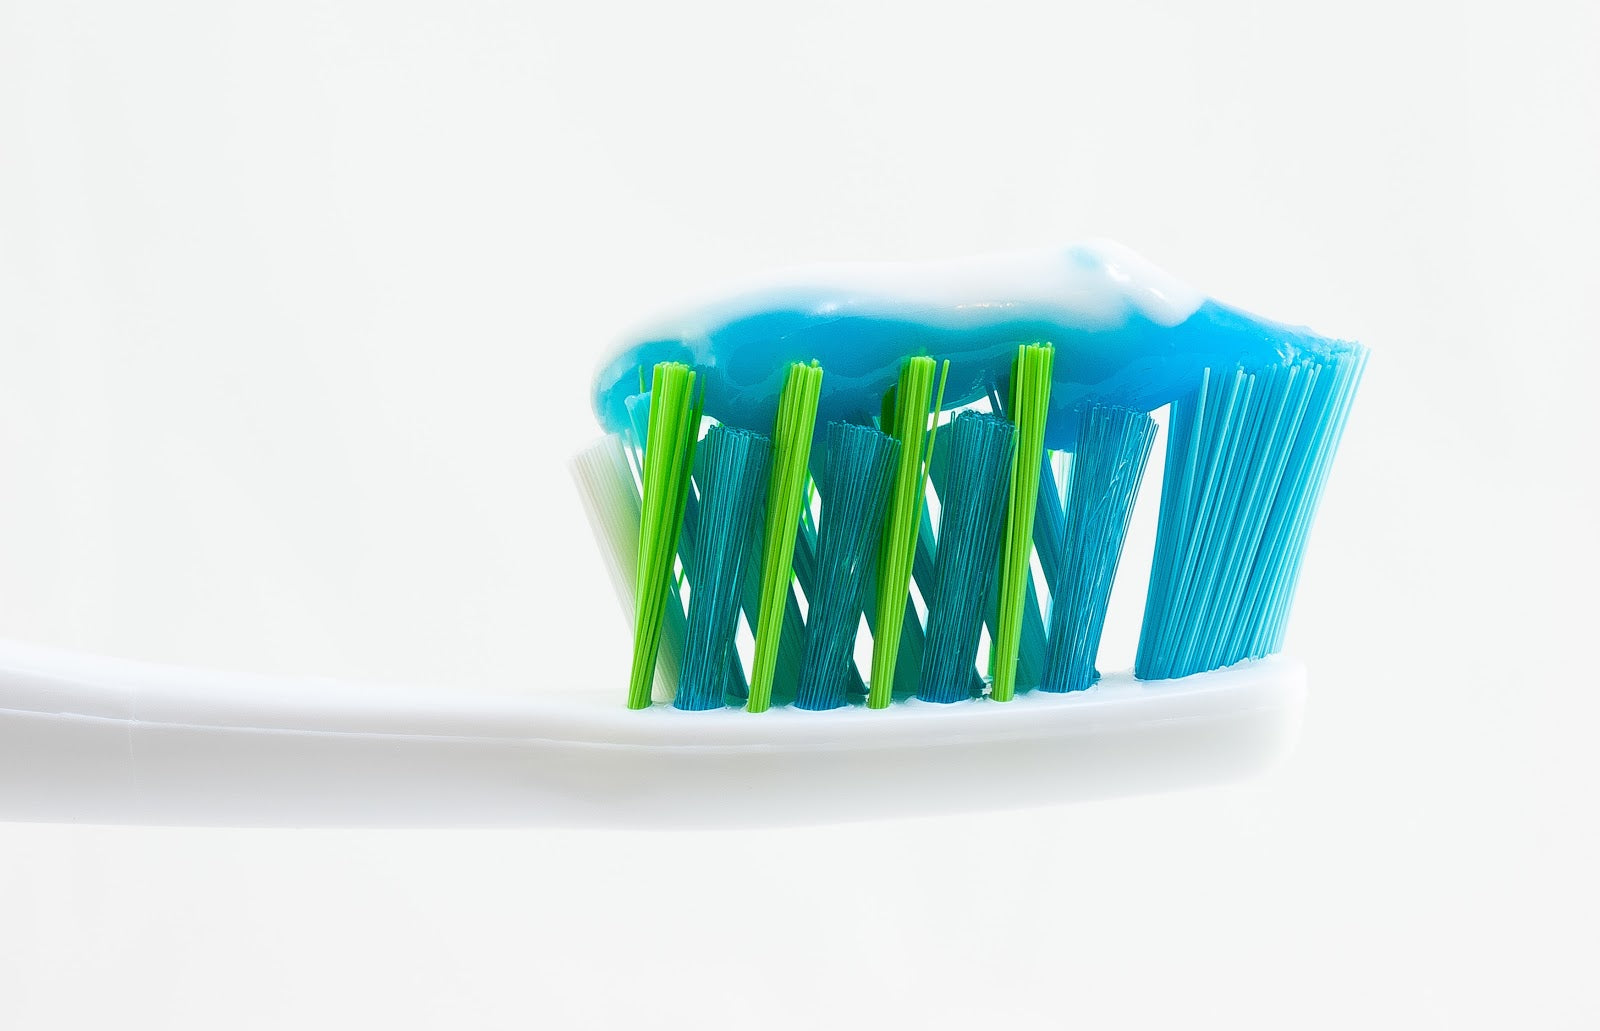 Does Toothpaste Expire? Using Toothpaste After Expiration